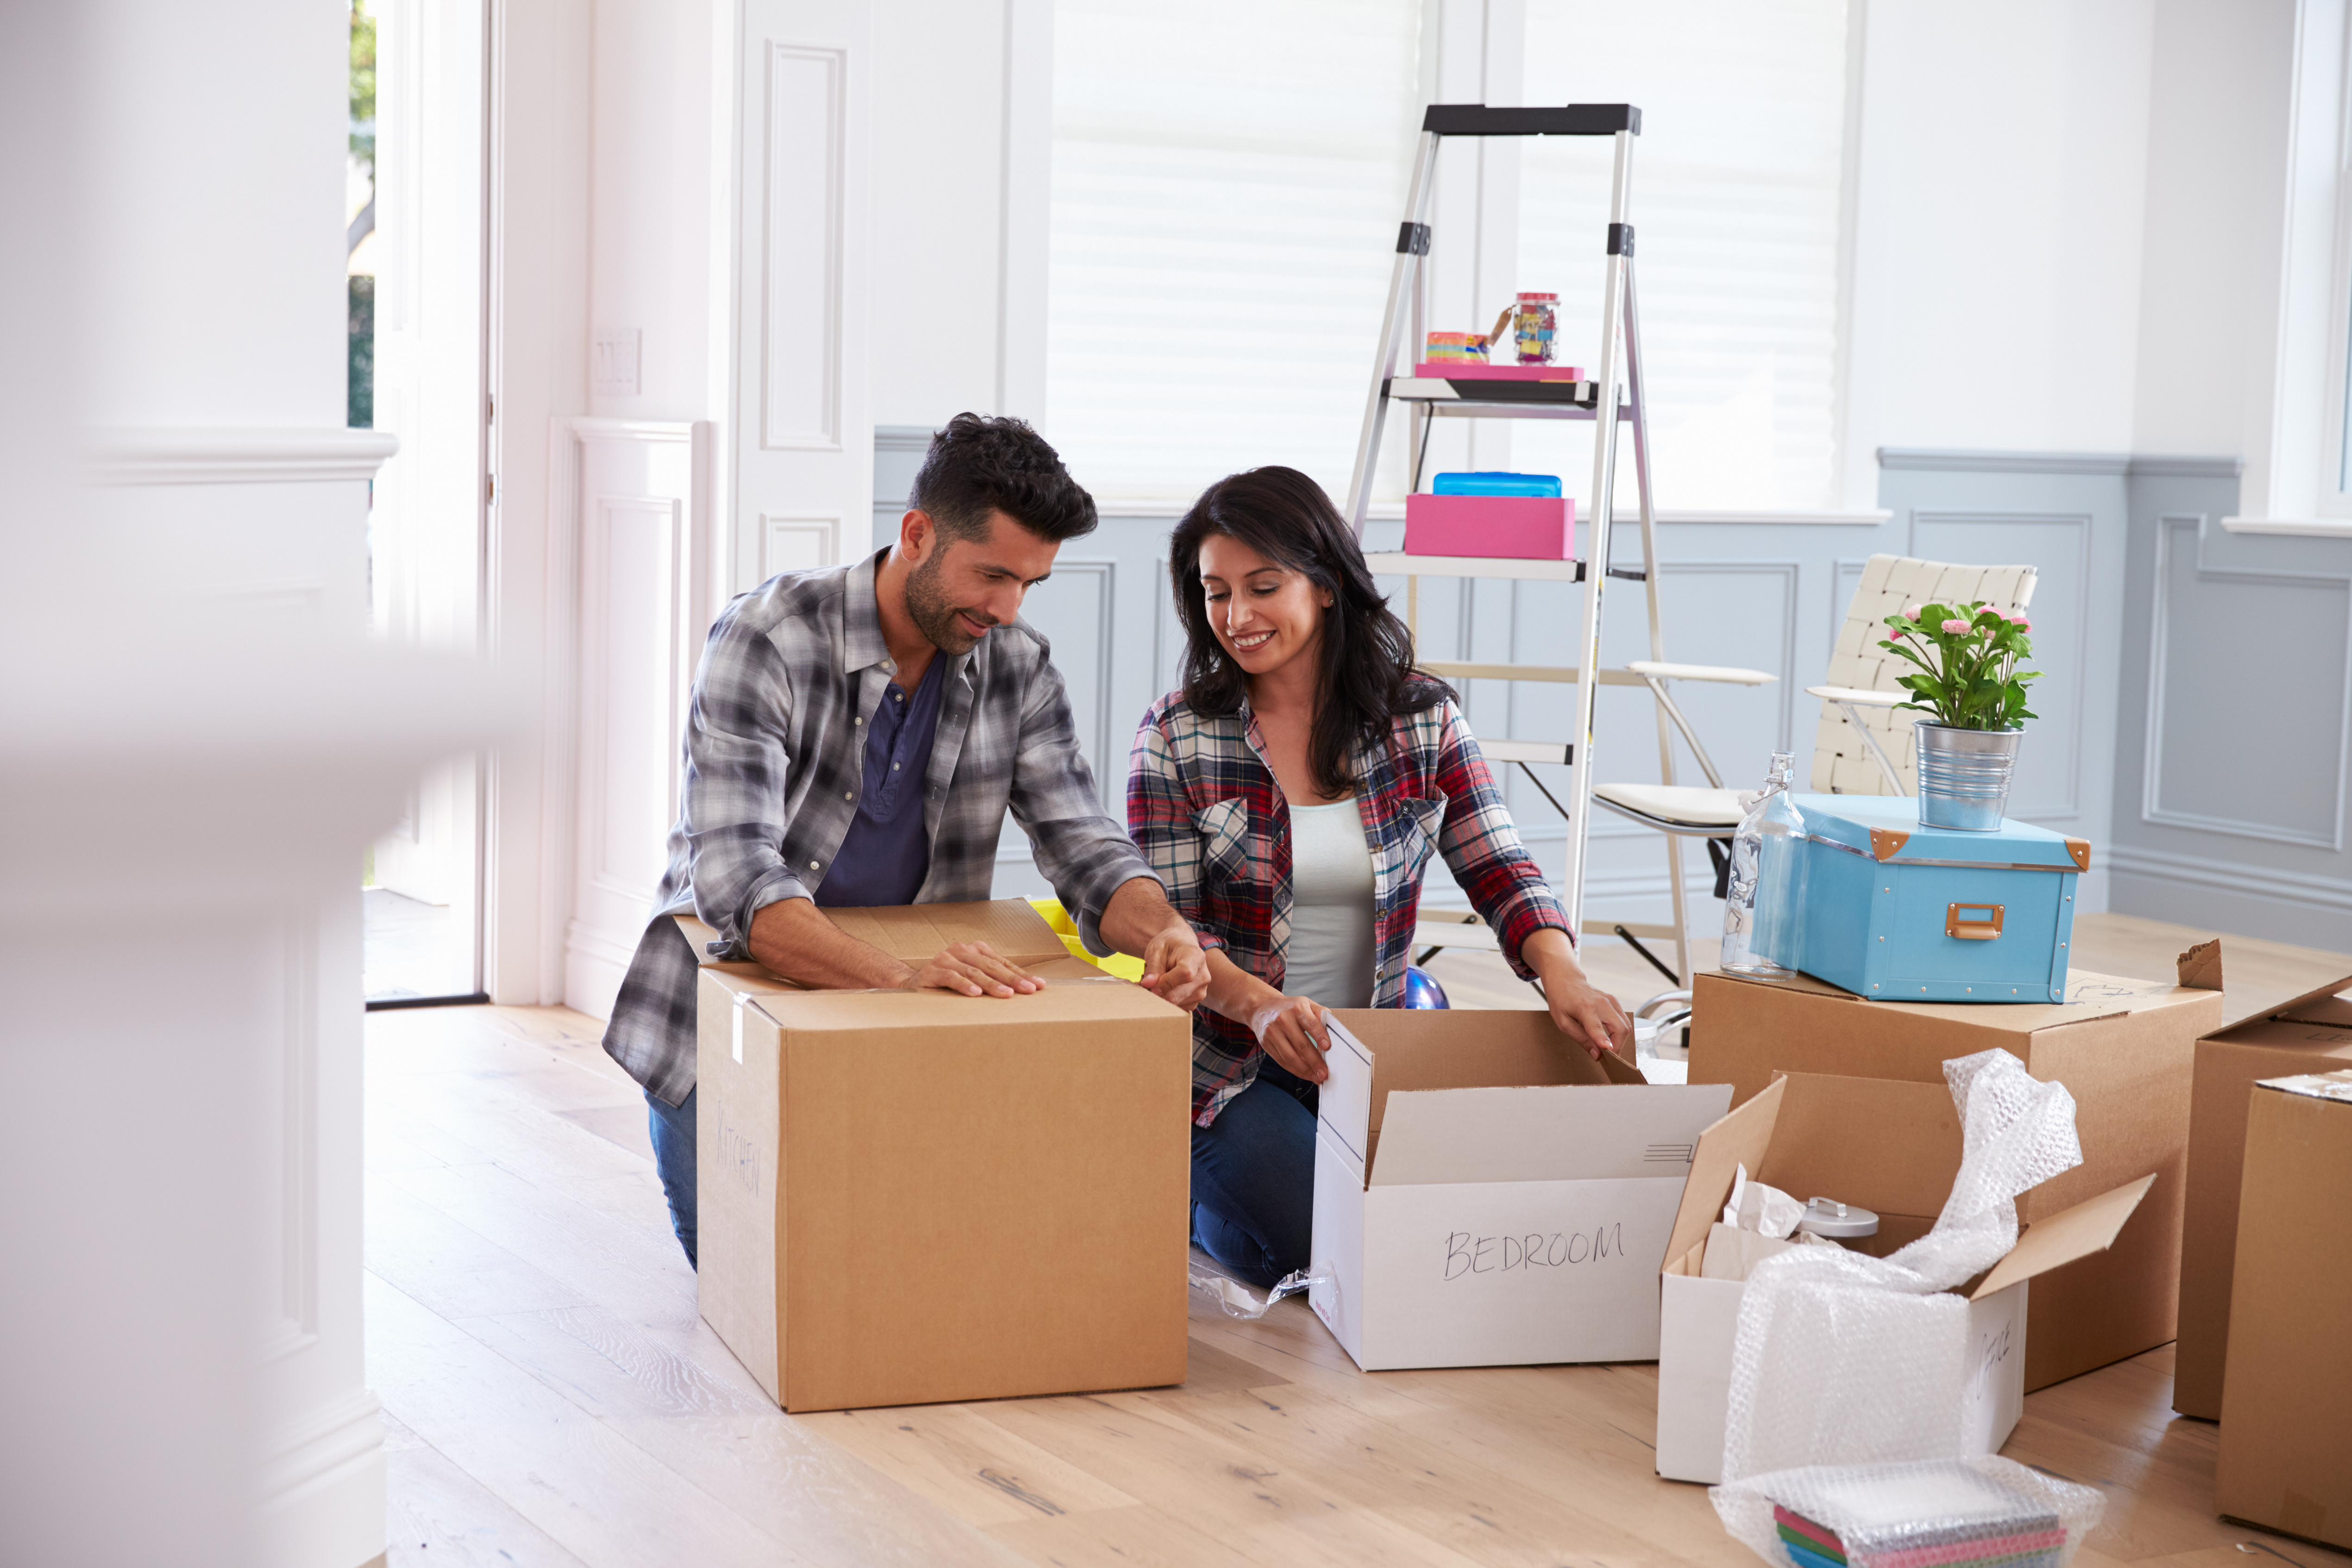 Easy Home Improvement to-Dos Before You Unpack